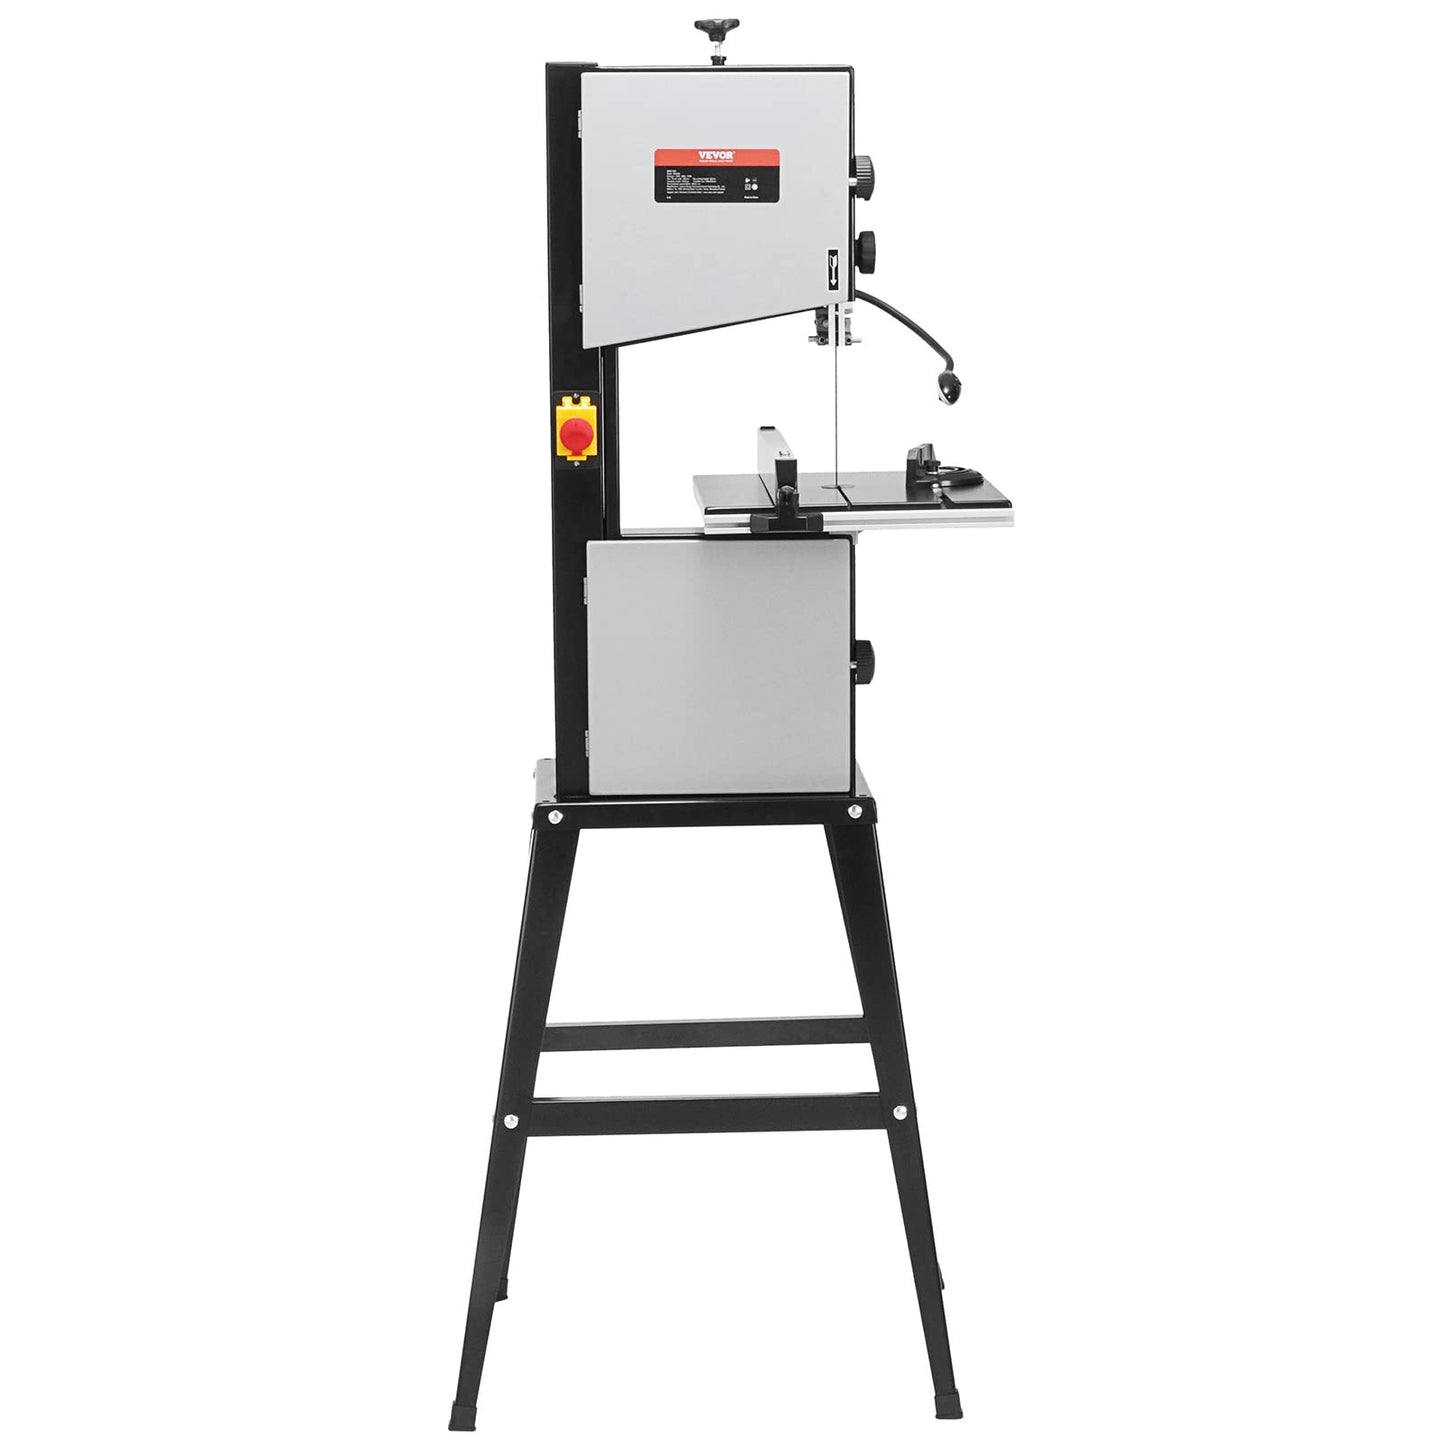 VEVOR Band Saw with Stand, 10-Inch, 560 & 1100 RPM Two-Speed Benchtop Bandsaw, 370W 1/2HP Motor with Metal Stand Optimized Work Light Workbench Fence